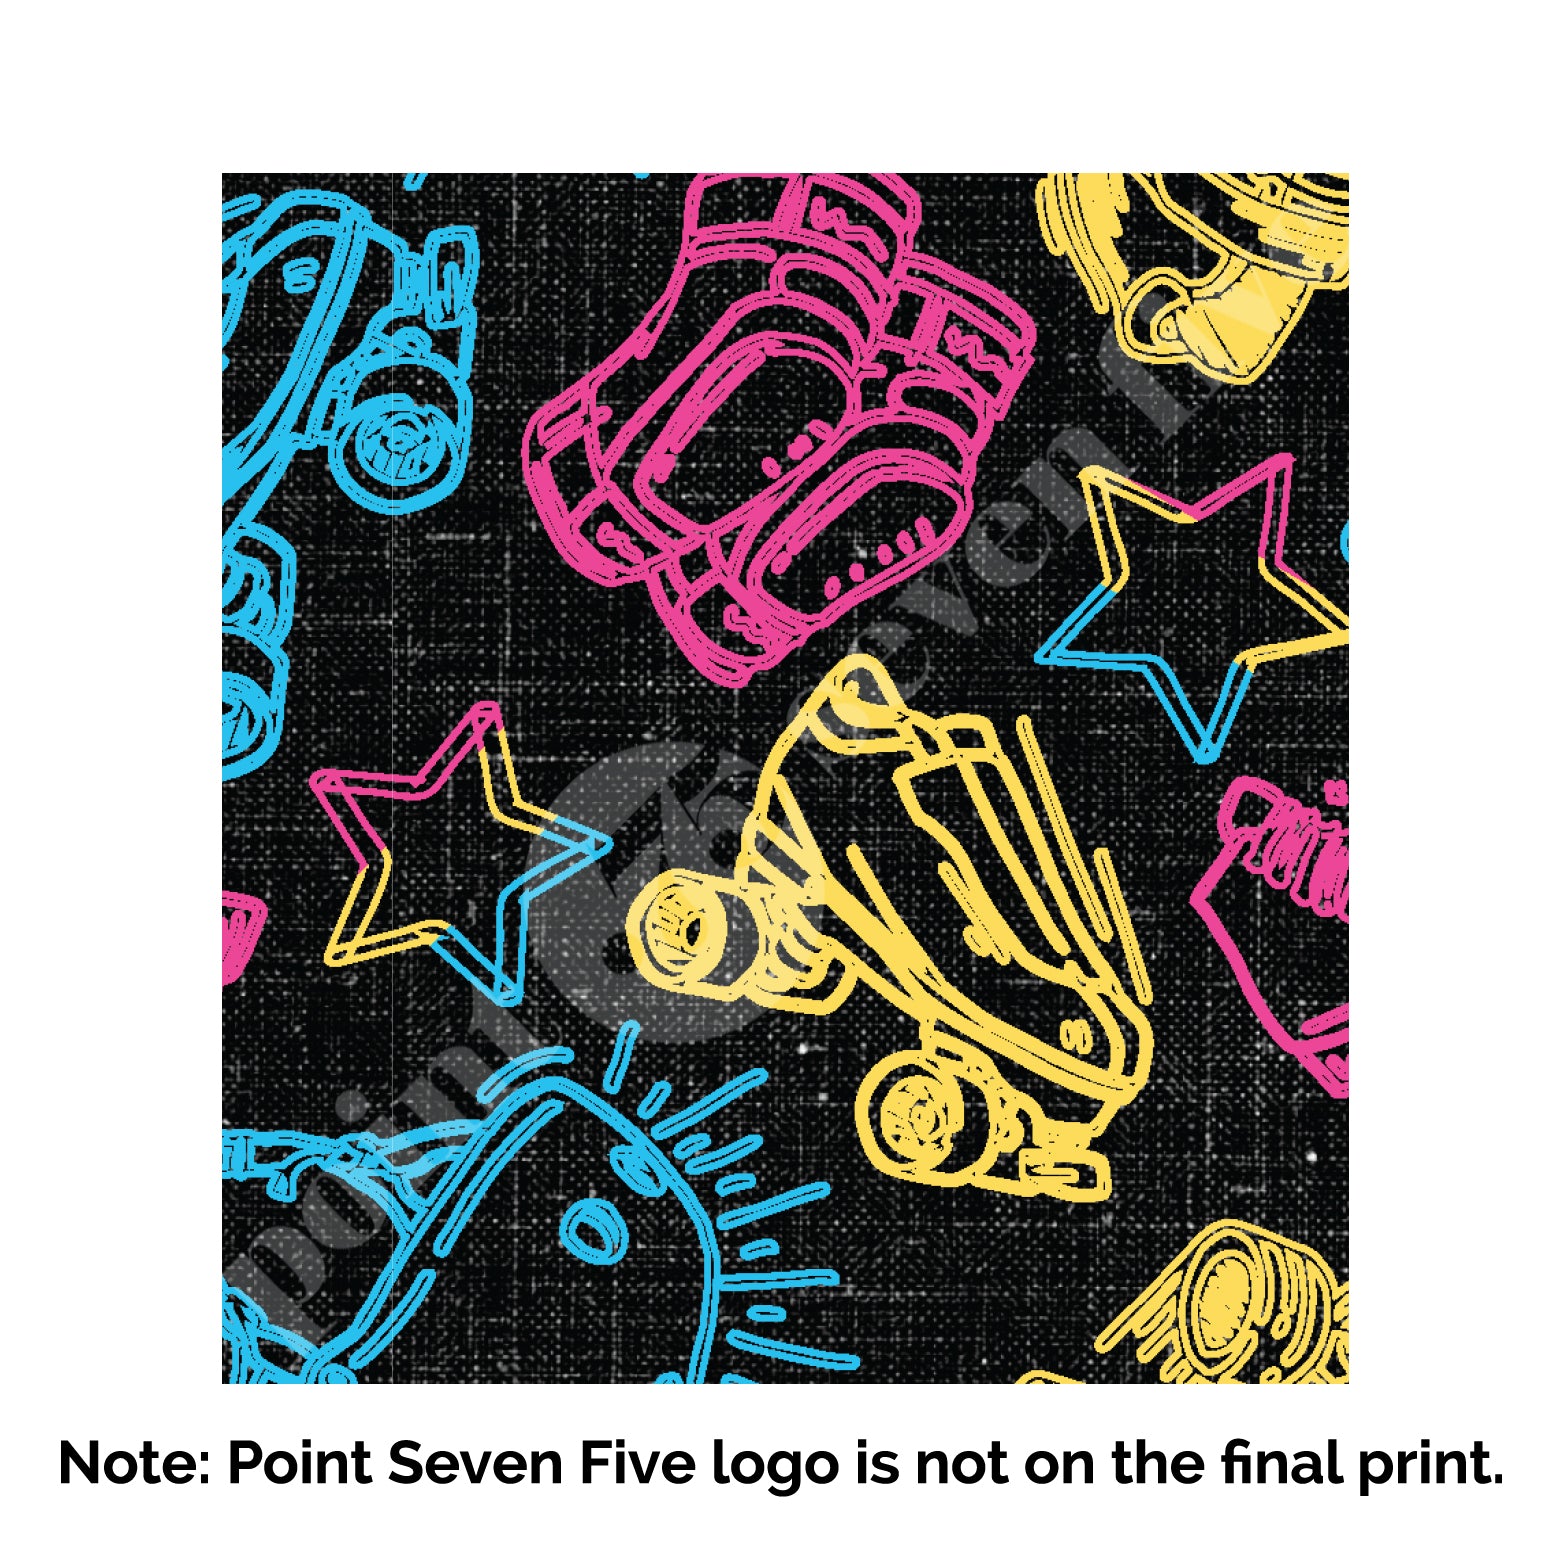 A closeup of the Pride Skate print, caption at the bottom reads "Note: Point Seven Five logo is not onthe final print." The print has rollerskates, helmets, stars & knee pads. The graphics are in the colours of the Pan Pride Flag pink, blue and  yellow.